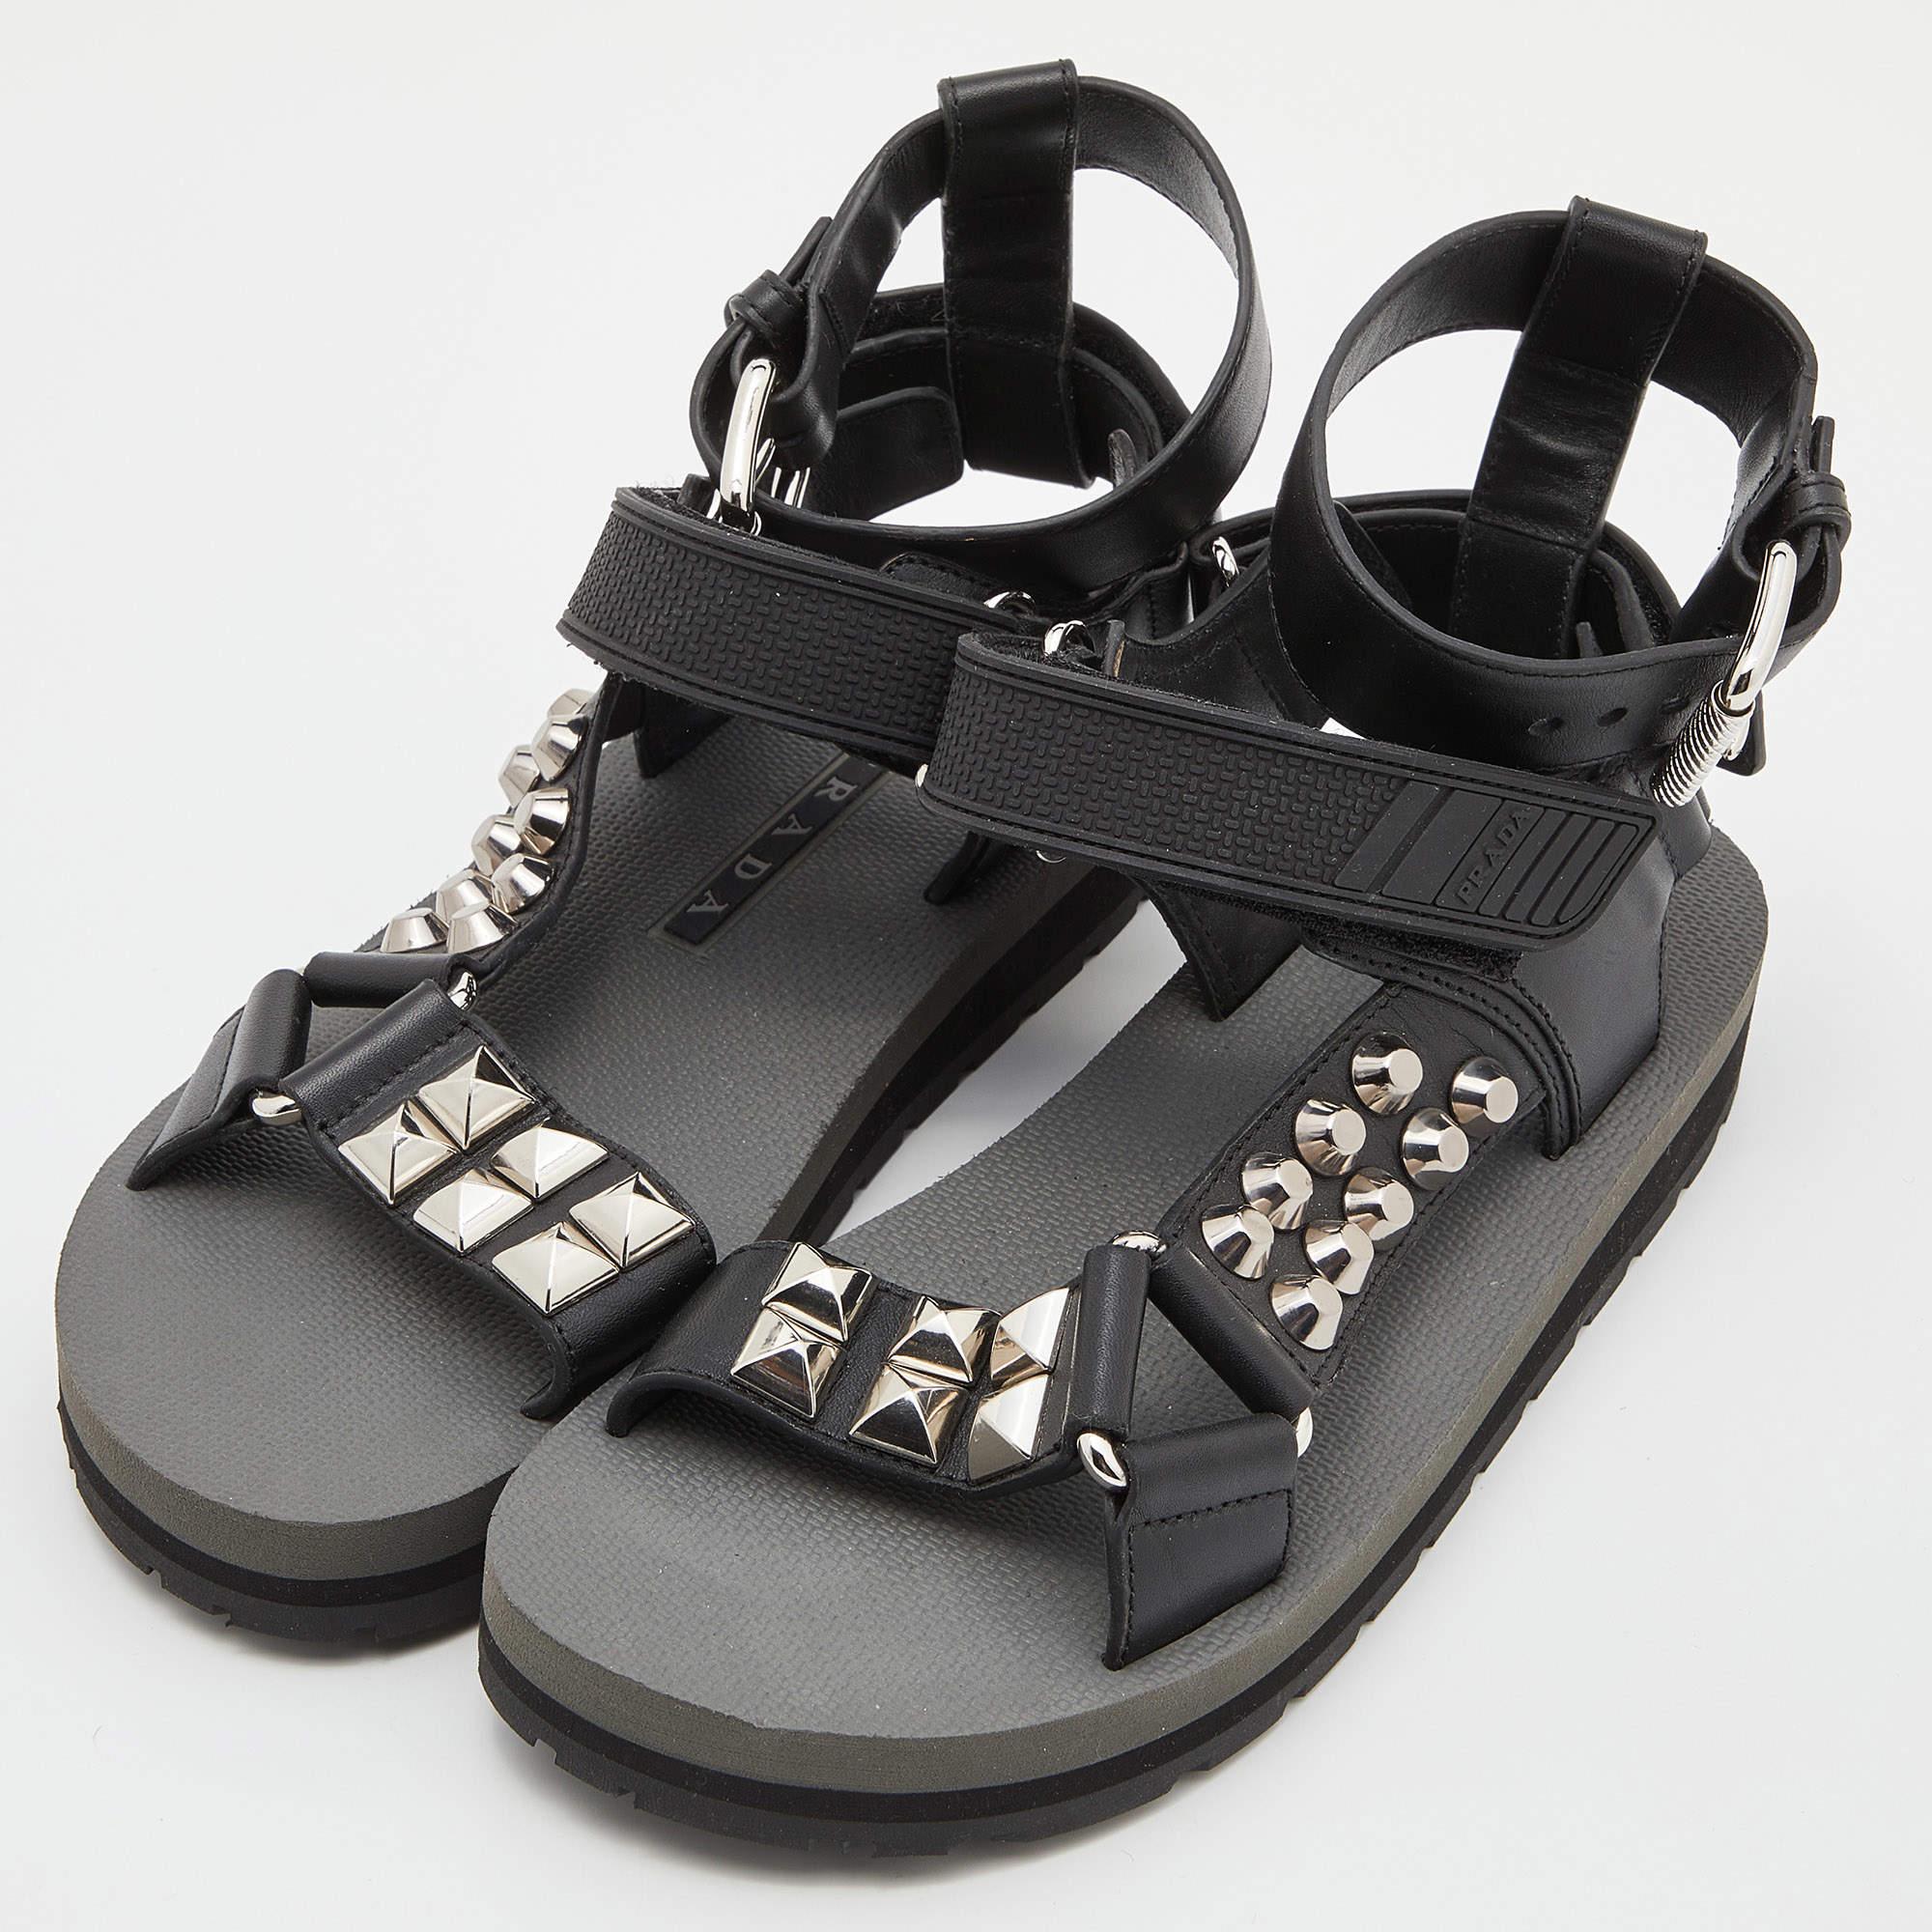 Women's Prada Black Leather and Rubber Punk Stud Ankle Strap Flat Sandals Size 37.5